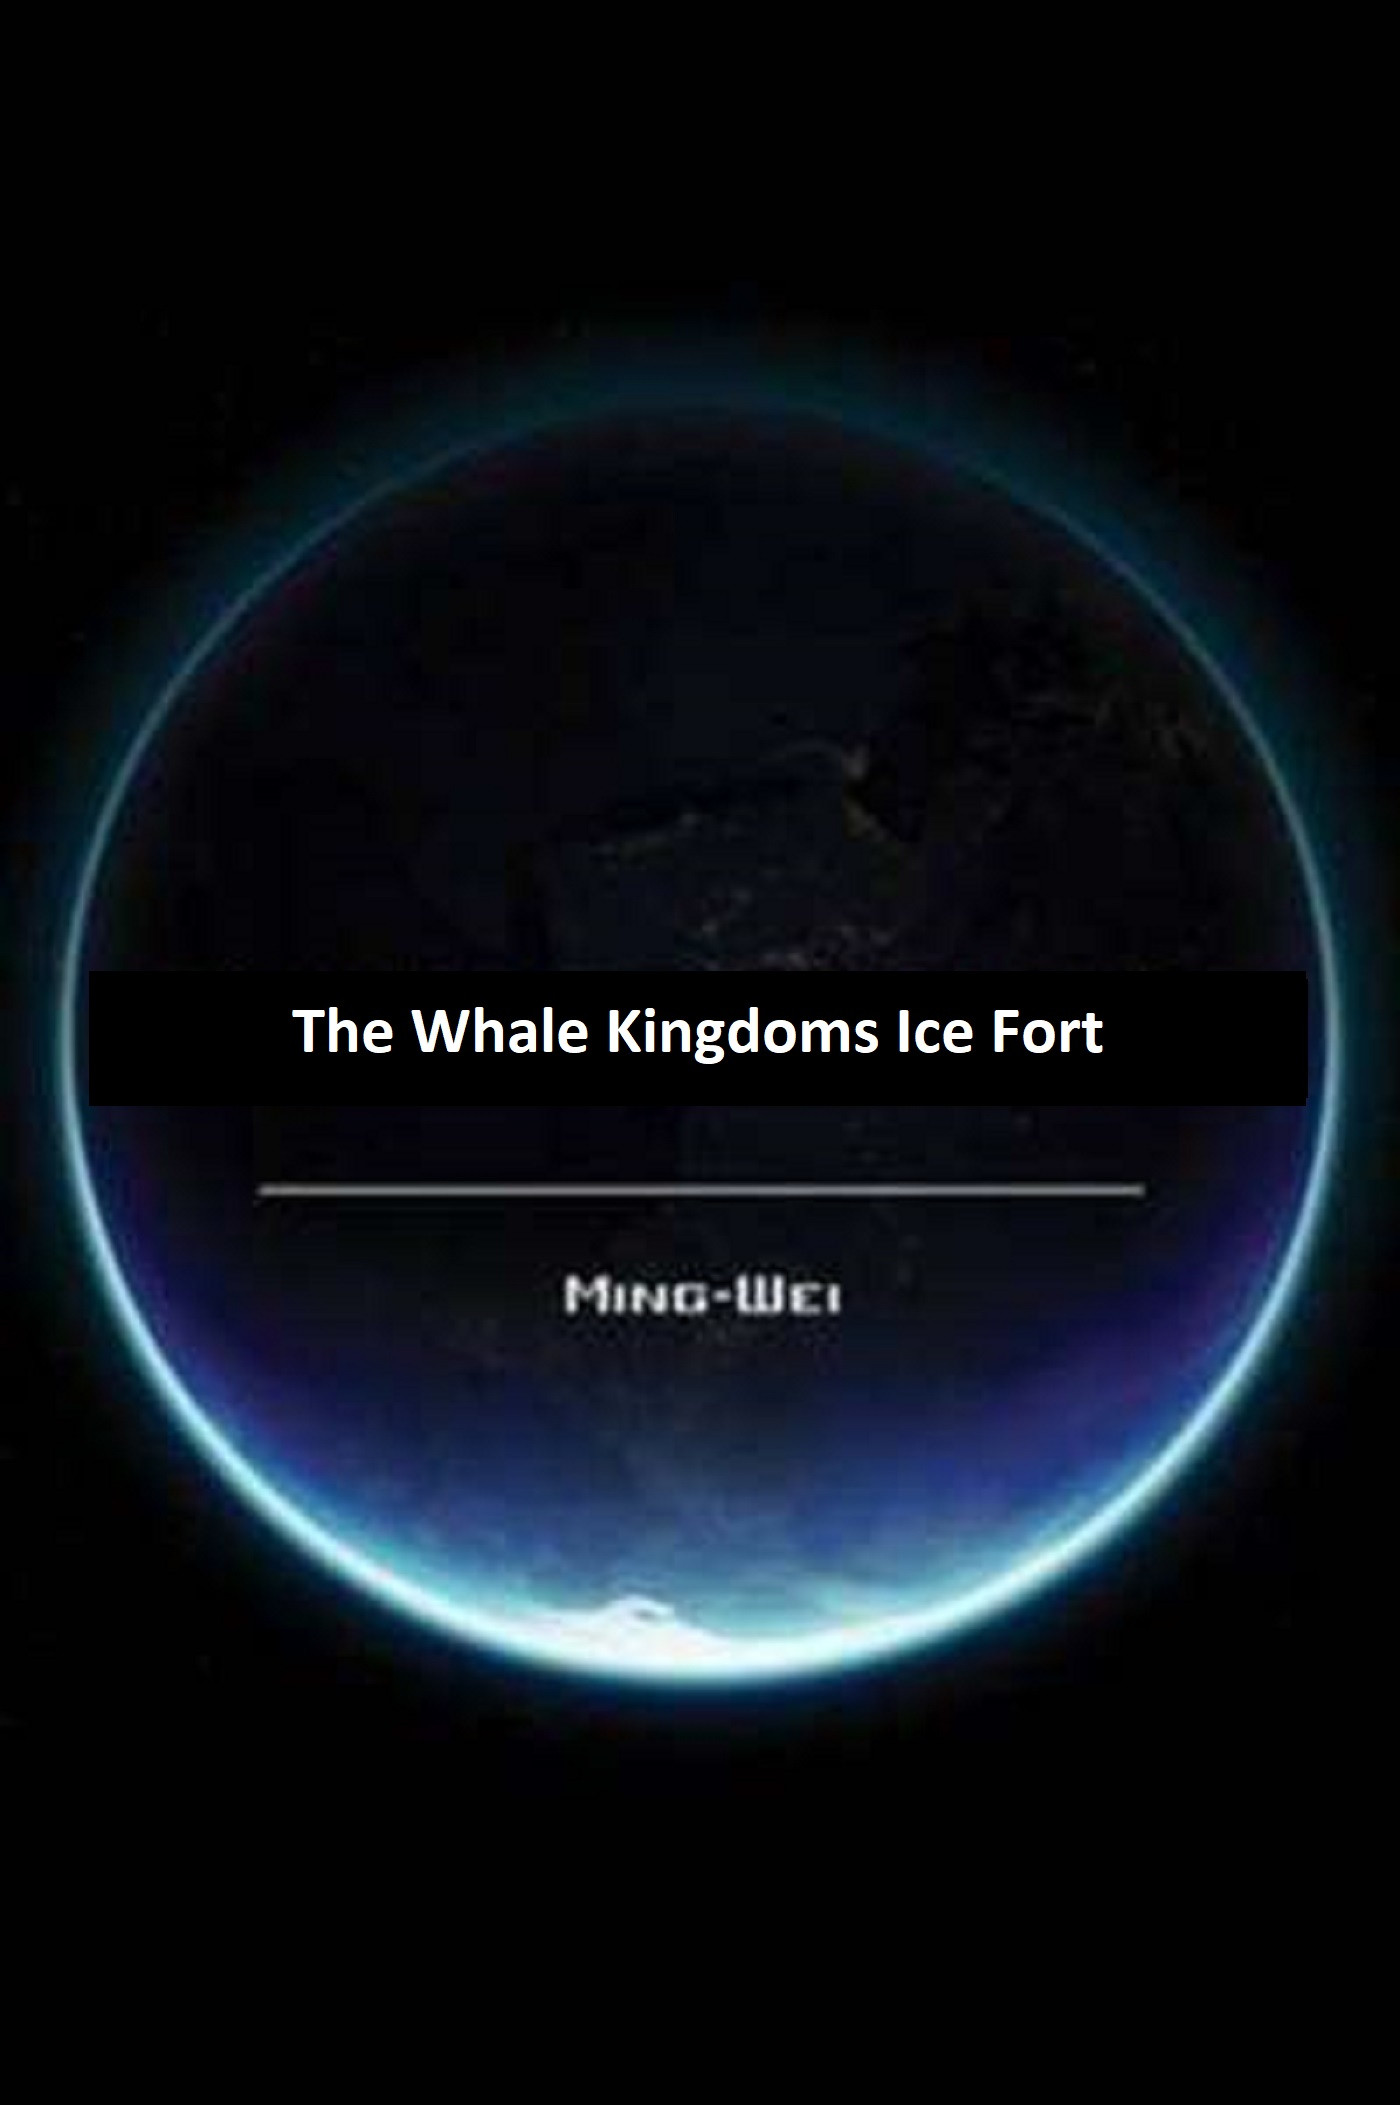 The Whale Kingdoms Ice Fort